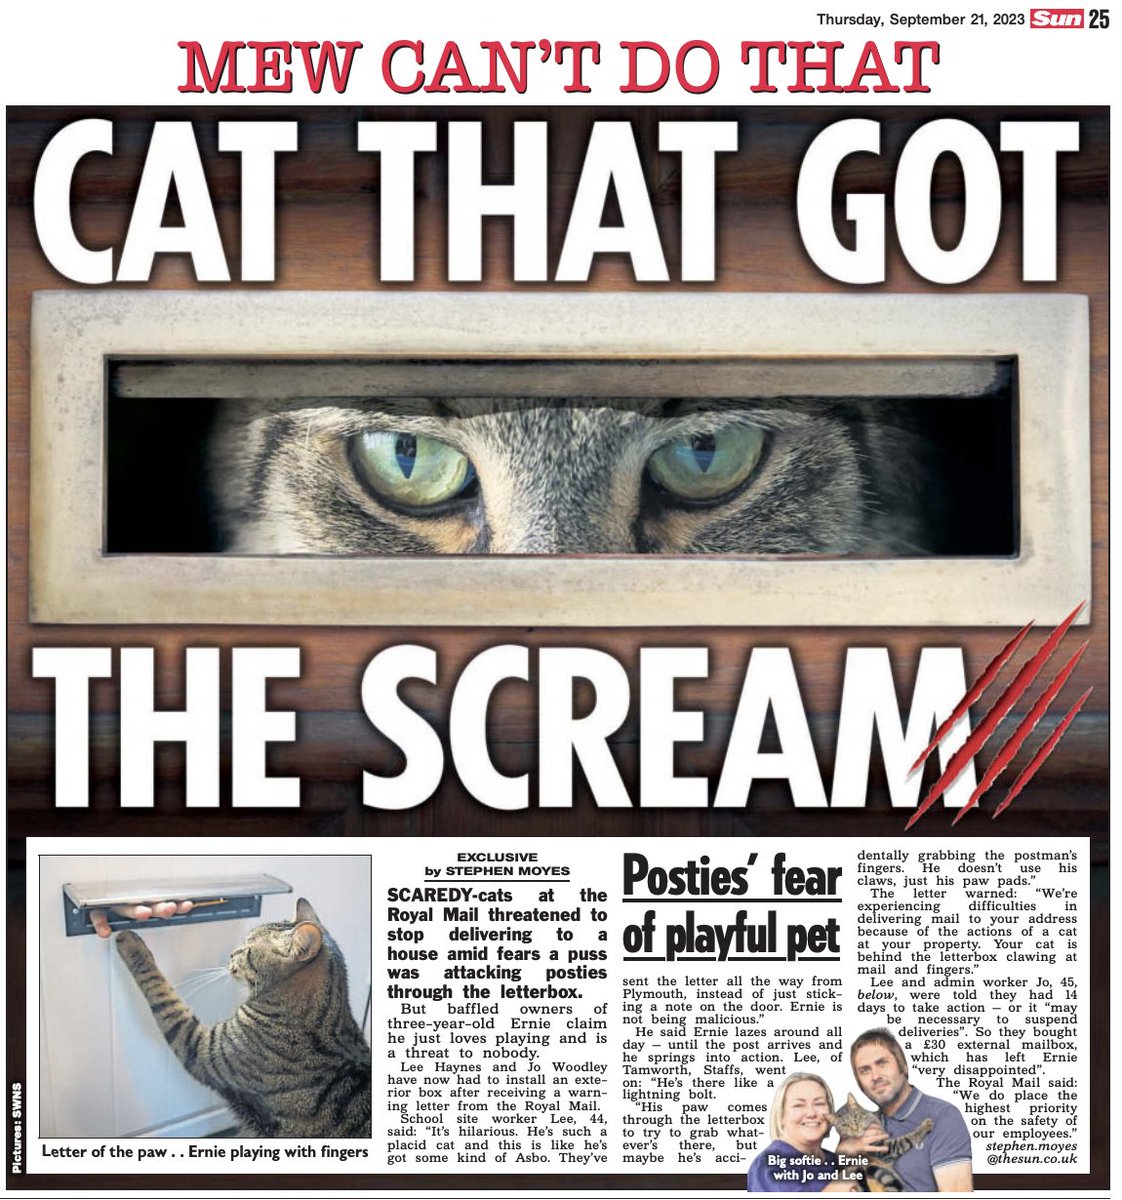 EXCLUSIVE in @TheSun - Royal Mail threatened to stop delivering to a couple - over claims their naughty cat was attacking the postman through the letterbox 🐈‍⬛📮 thesun.co.uk/news/24054165/… 🖋️ @KatePounds 📷 @AnitaMaric3